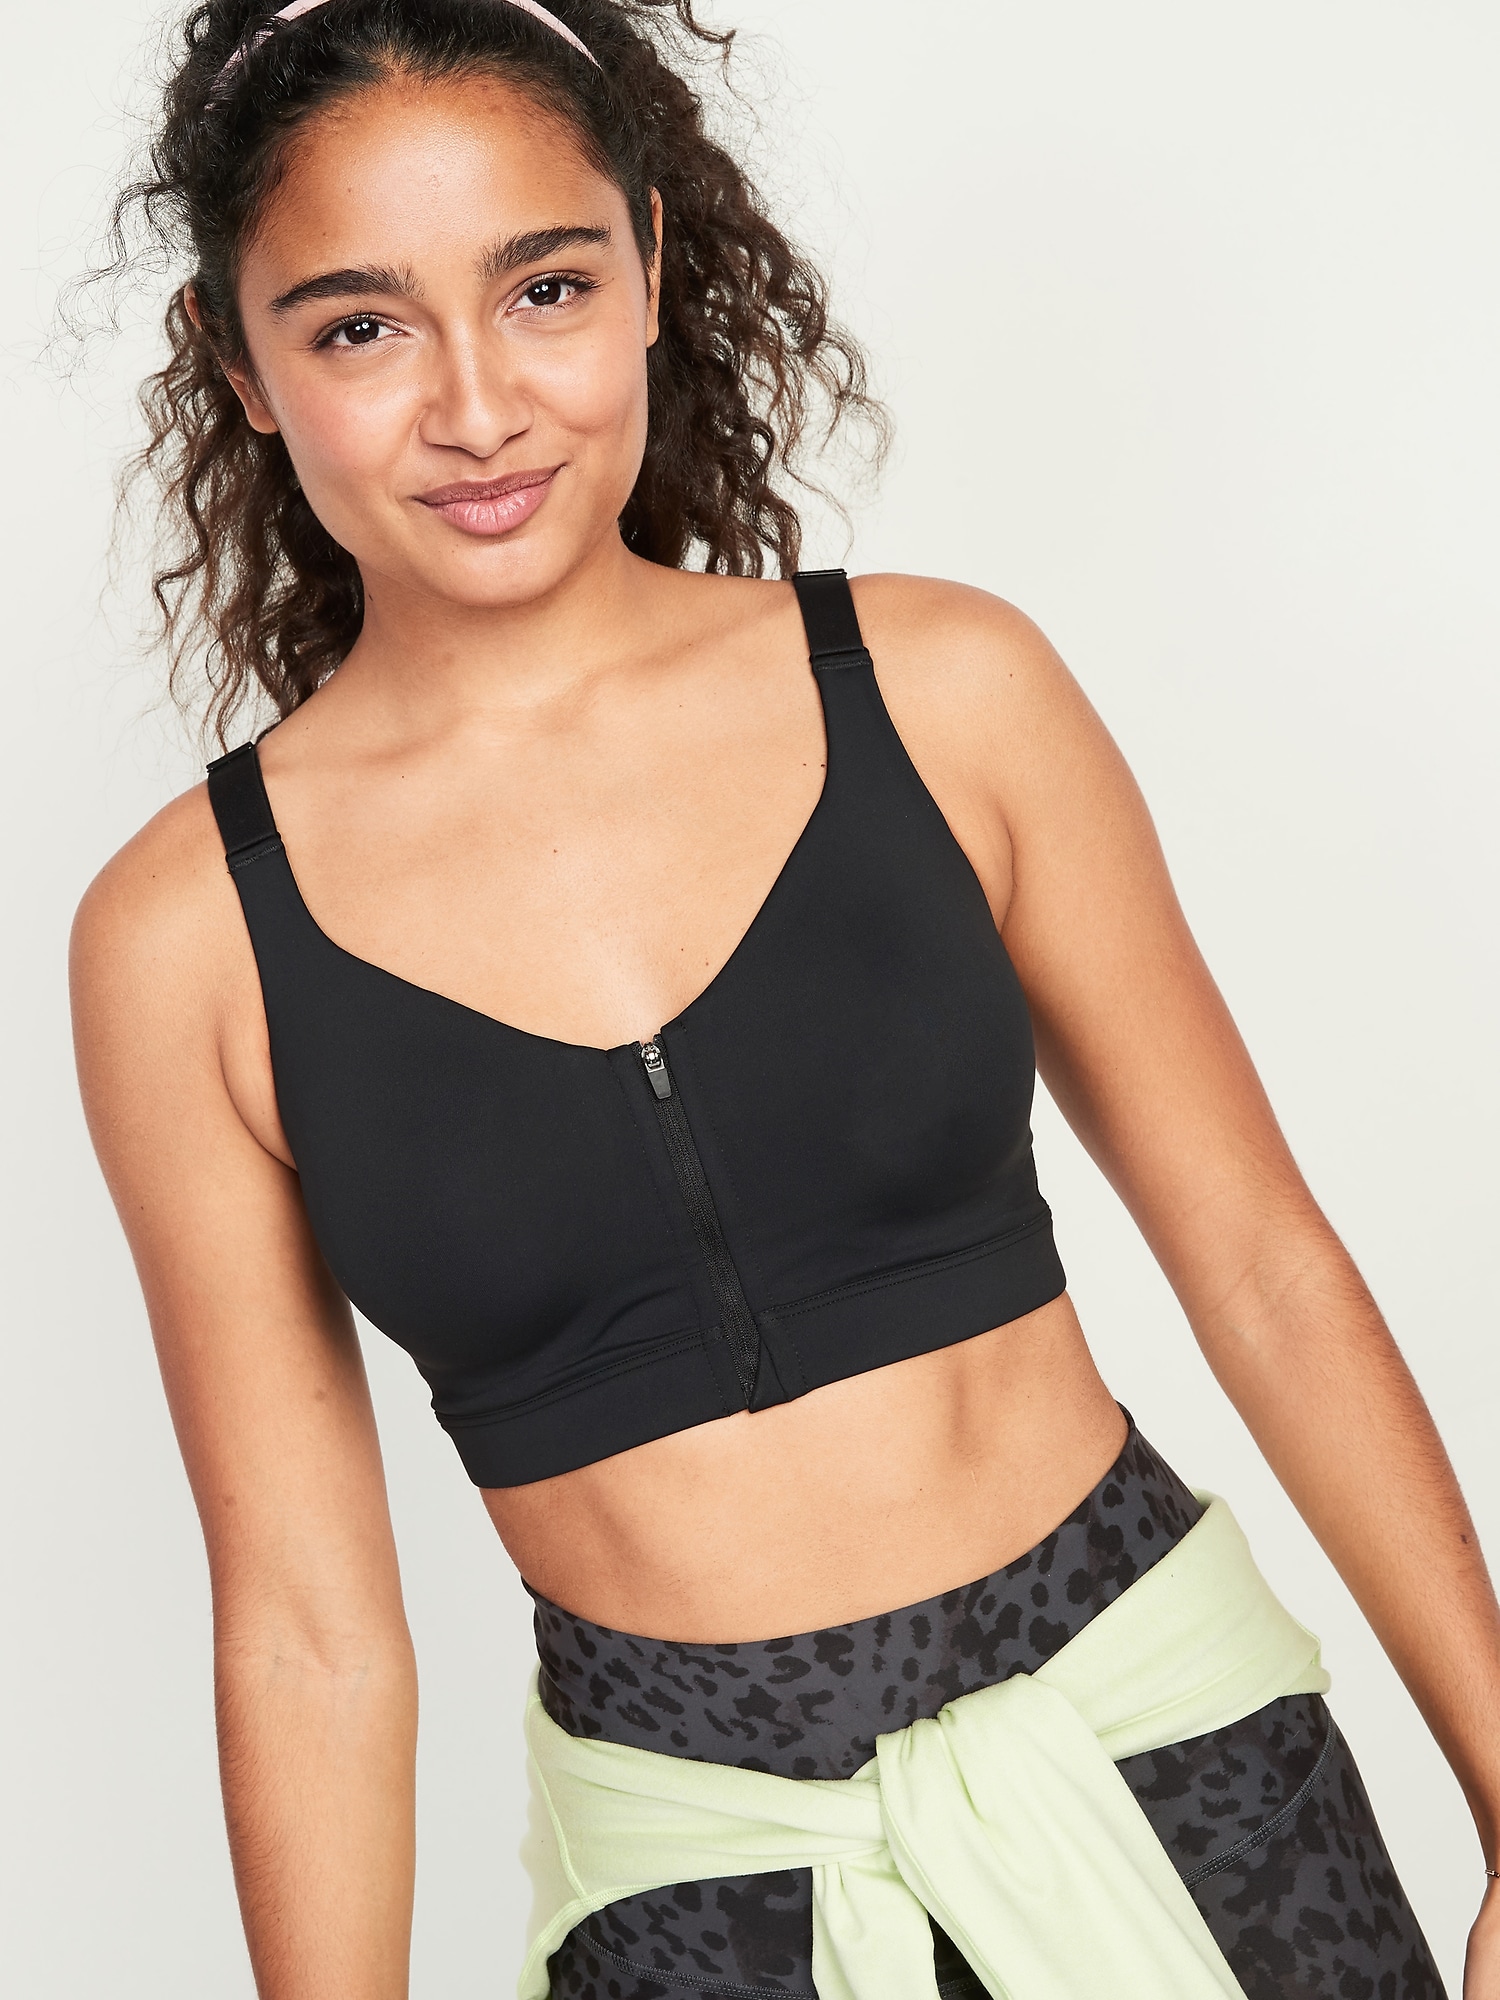 Up To 77% Off on Women's Zip Front Sports Bra